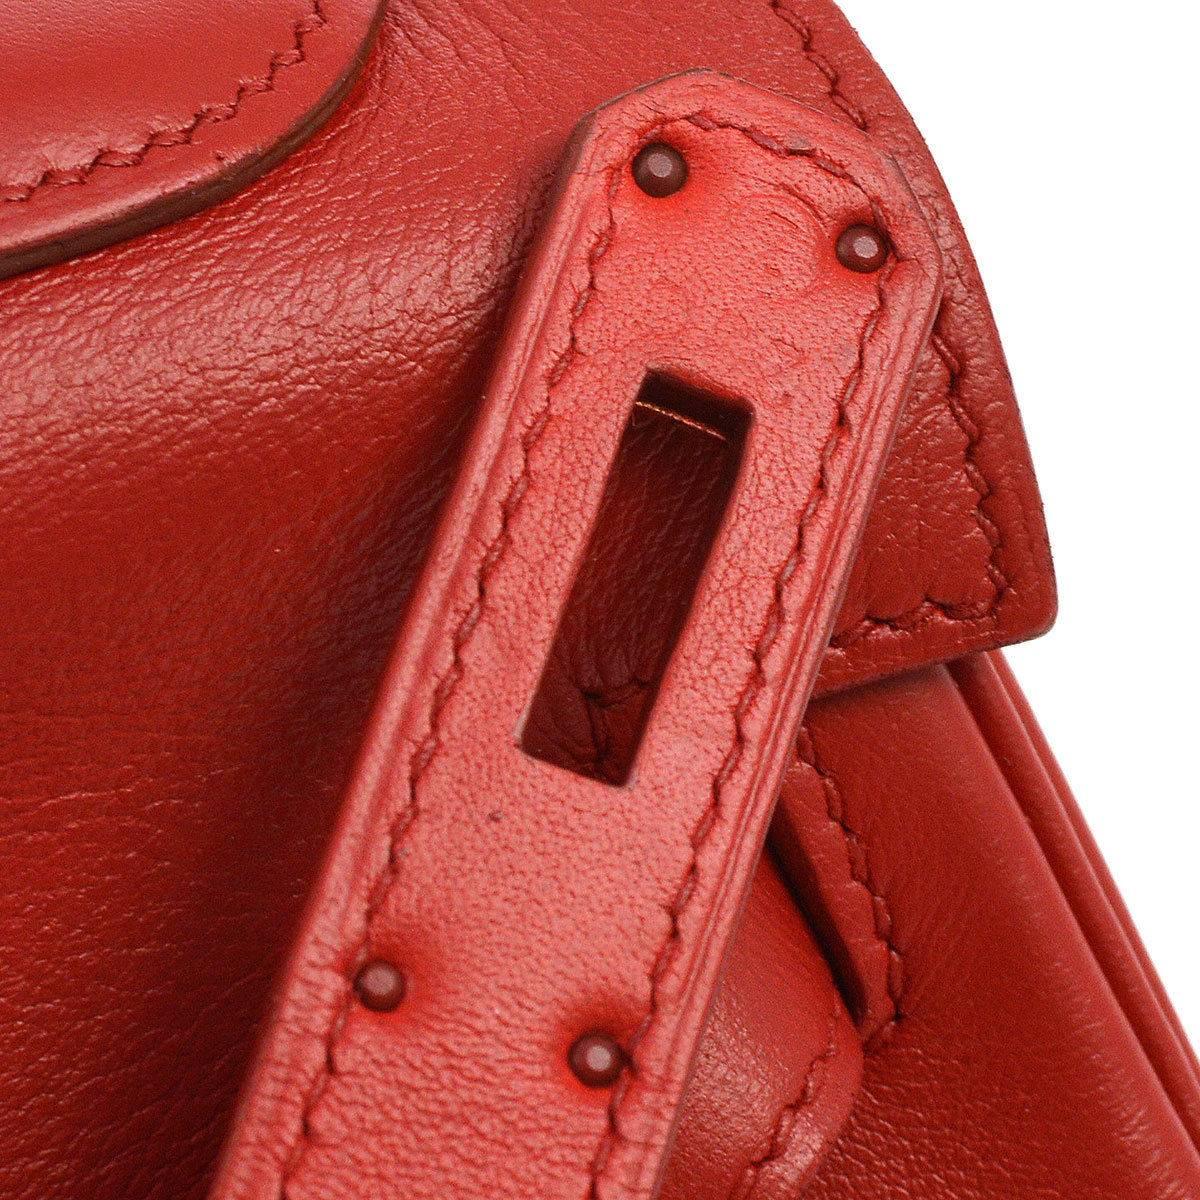 Hermes Kelly 32 Rouge Red Leather Evening Top Handle Satchel Flap Bag in Box 3